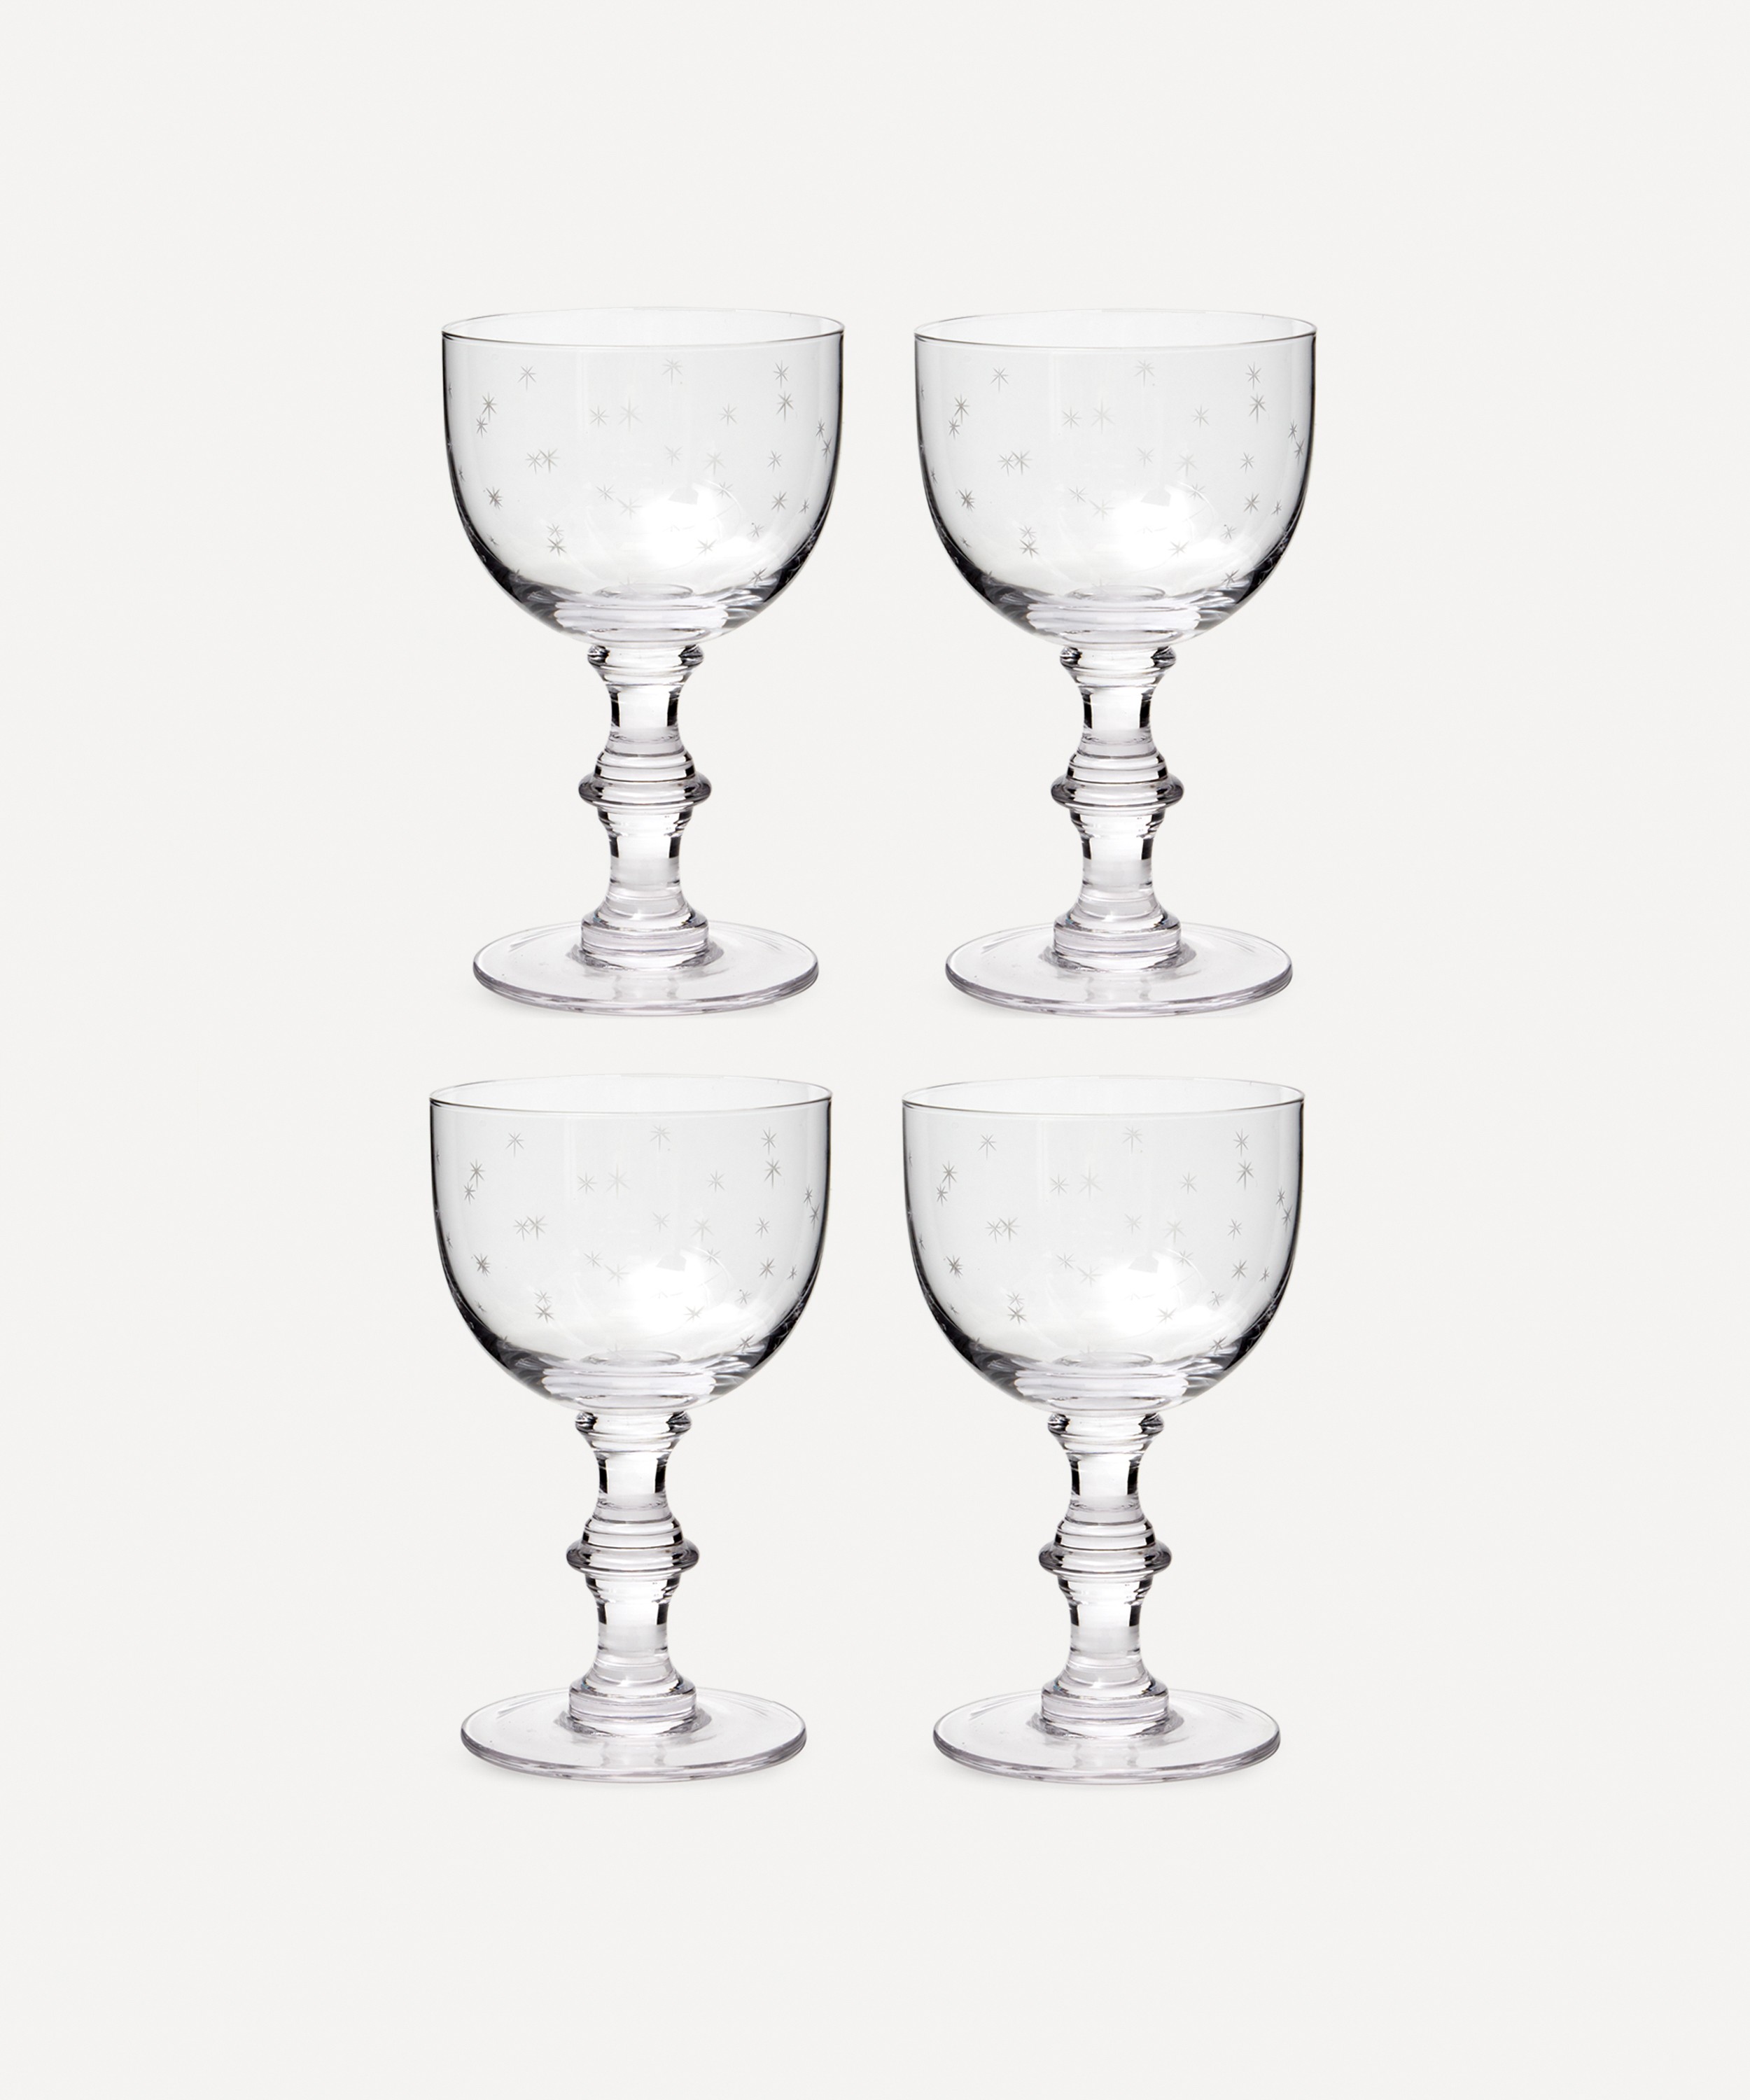 Crystal Cocktail Glasses with Stars Design, Set of 4 – Paloma and Co.